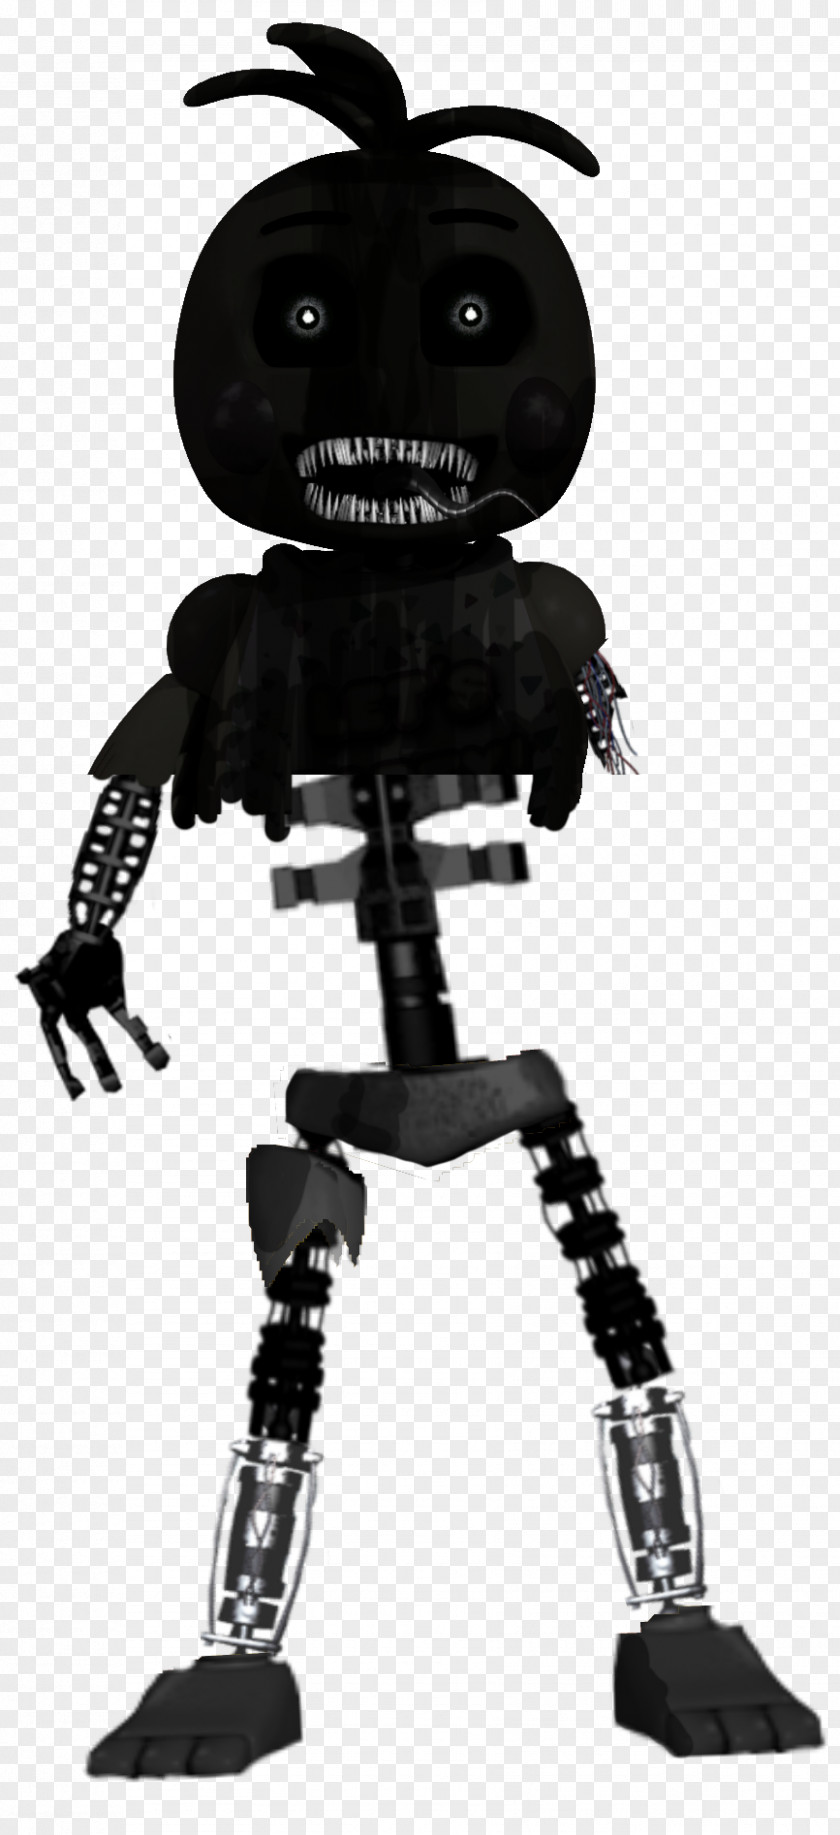 Five Nights At Freddy's 4 Nightmare Toy Black And White PNG